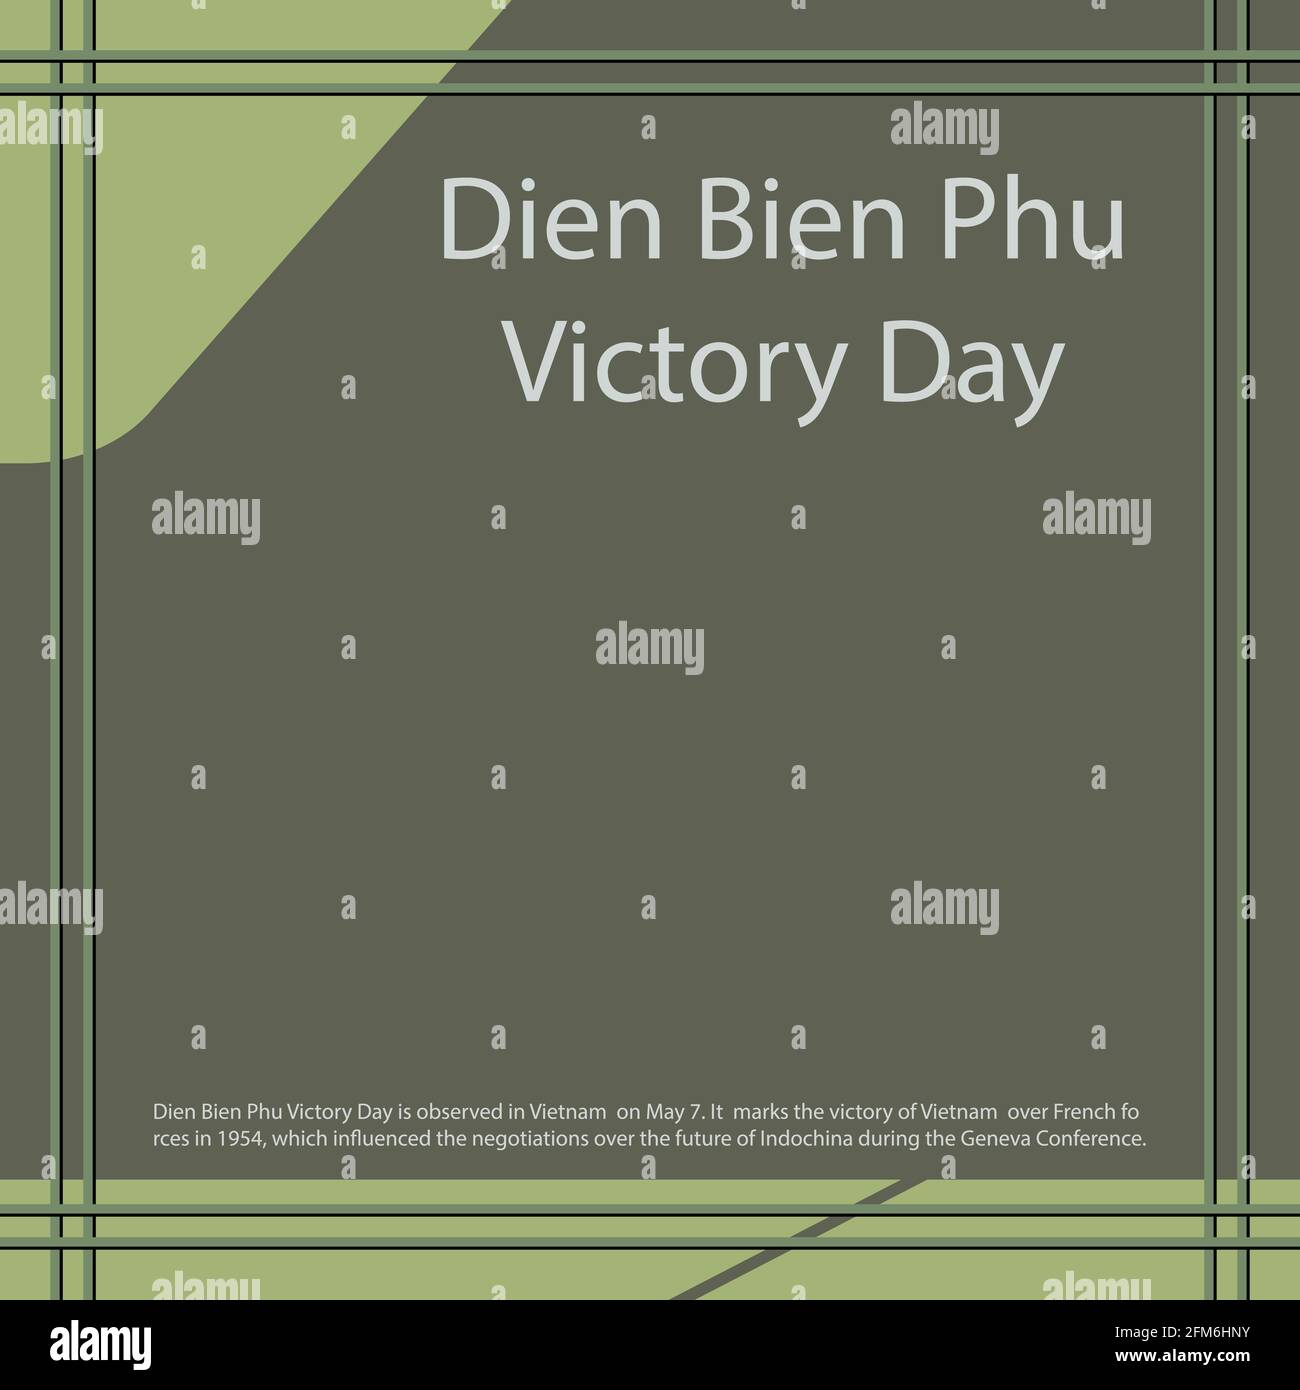 Dien Bien Phu Victory Day is observed in Vietnam on May 7. It marks the victory of Vietnam over French forces in 1954, which influenced the negotiatio Stock Vector